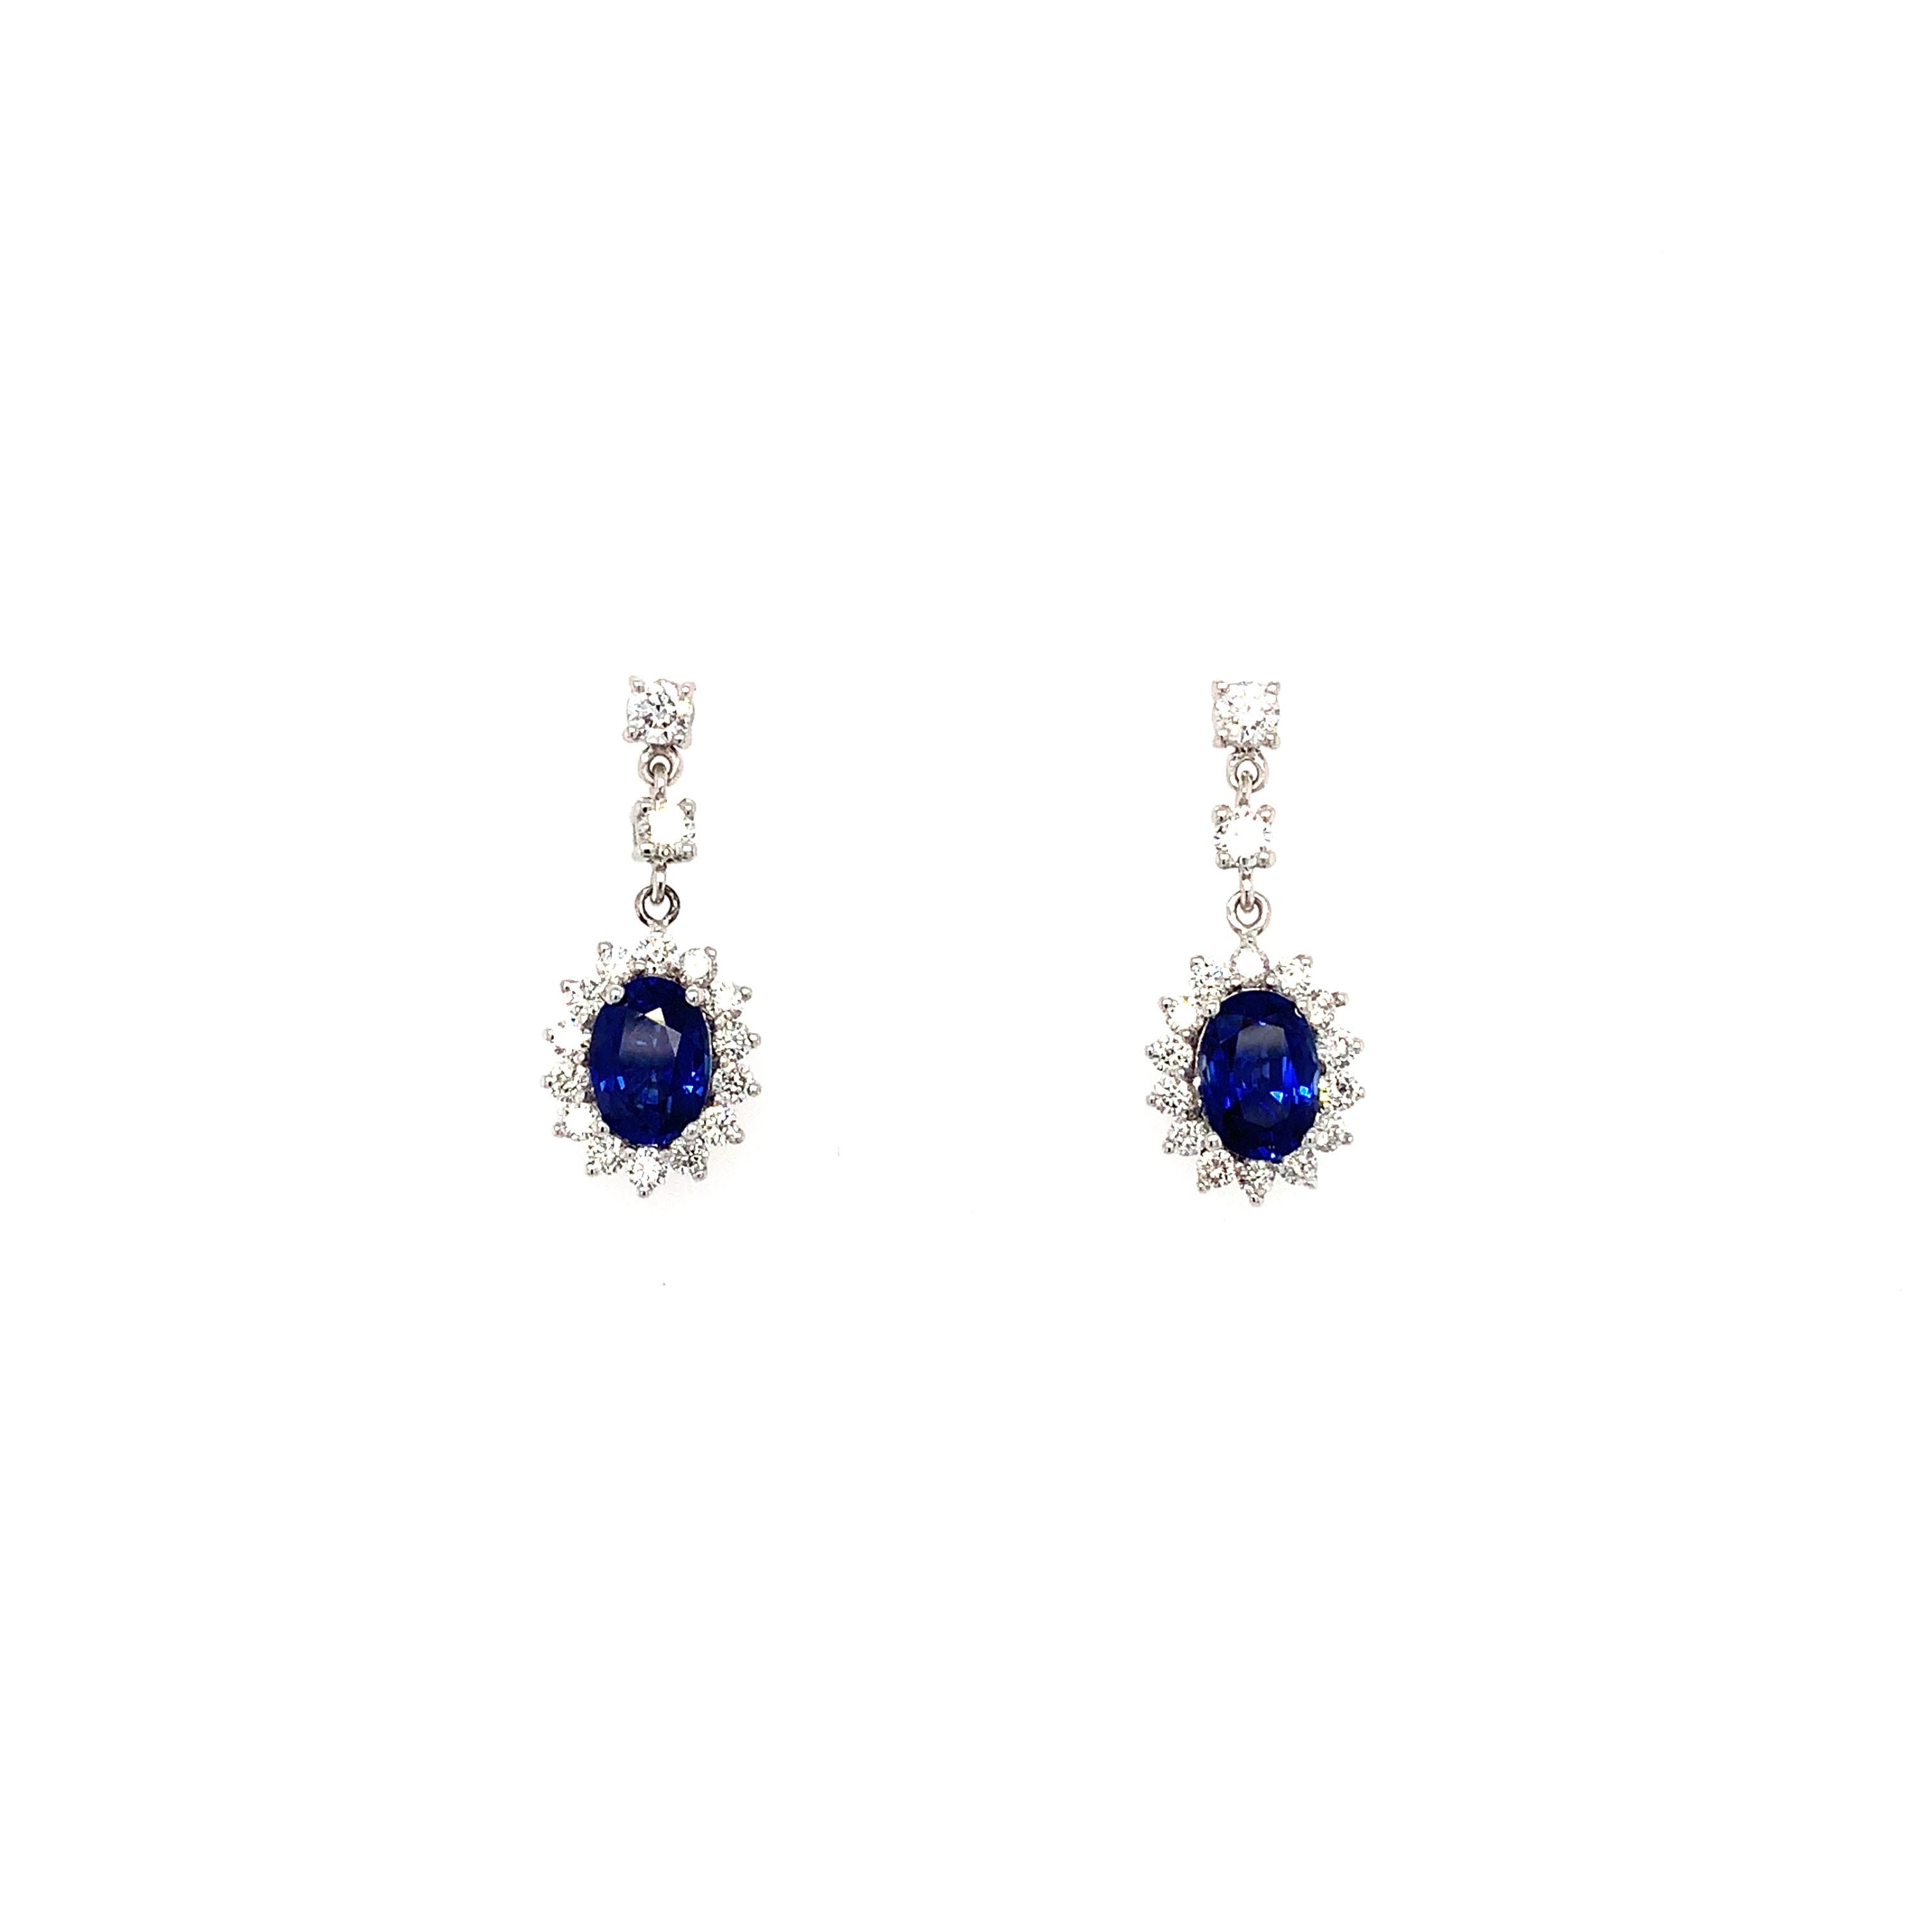 Sapphire and diamonds art deco drop earrings 18k white gold
Gorgeous art deco drop style stud earrings with sapphire and diamonds in 18k white gold.
Sapphire Ceylon royal blue natural gemstone oval shaped total weight approximately 2.00ct 
Round